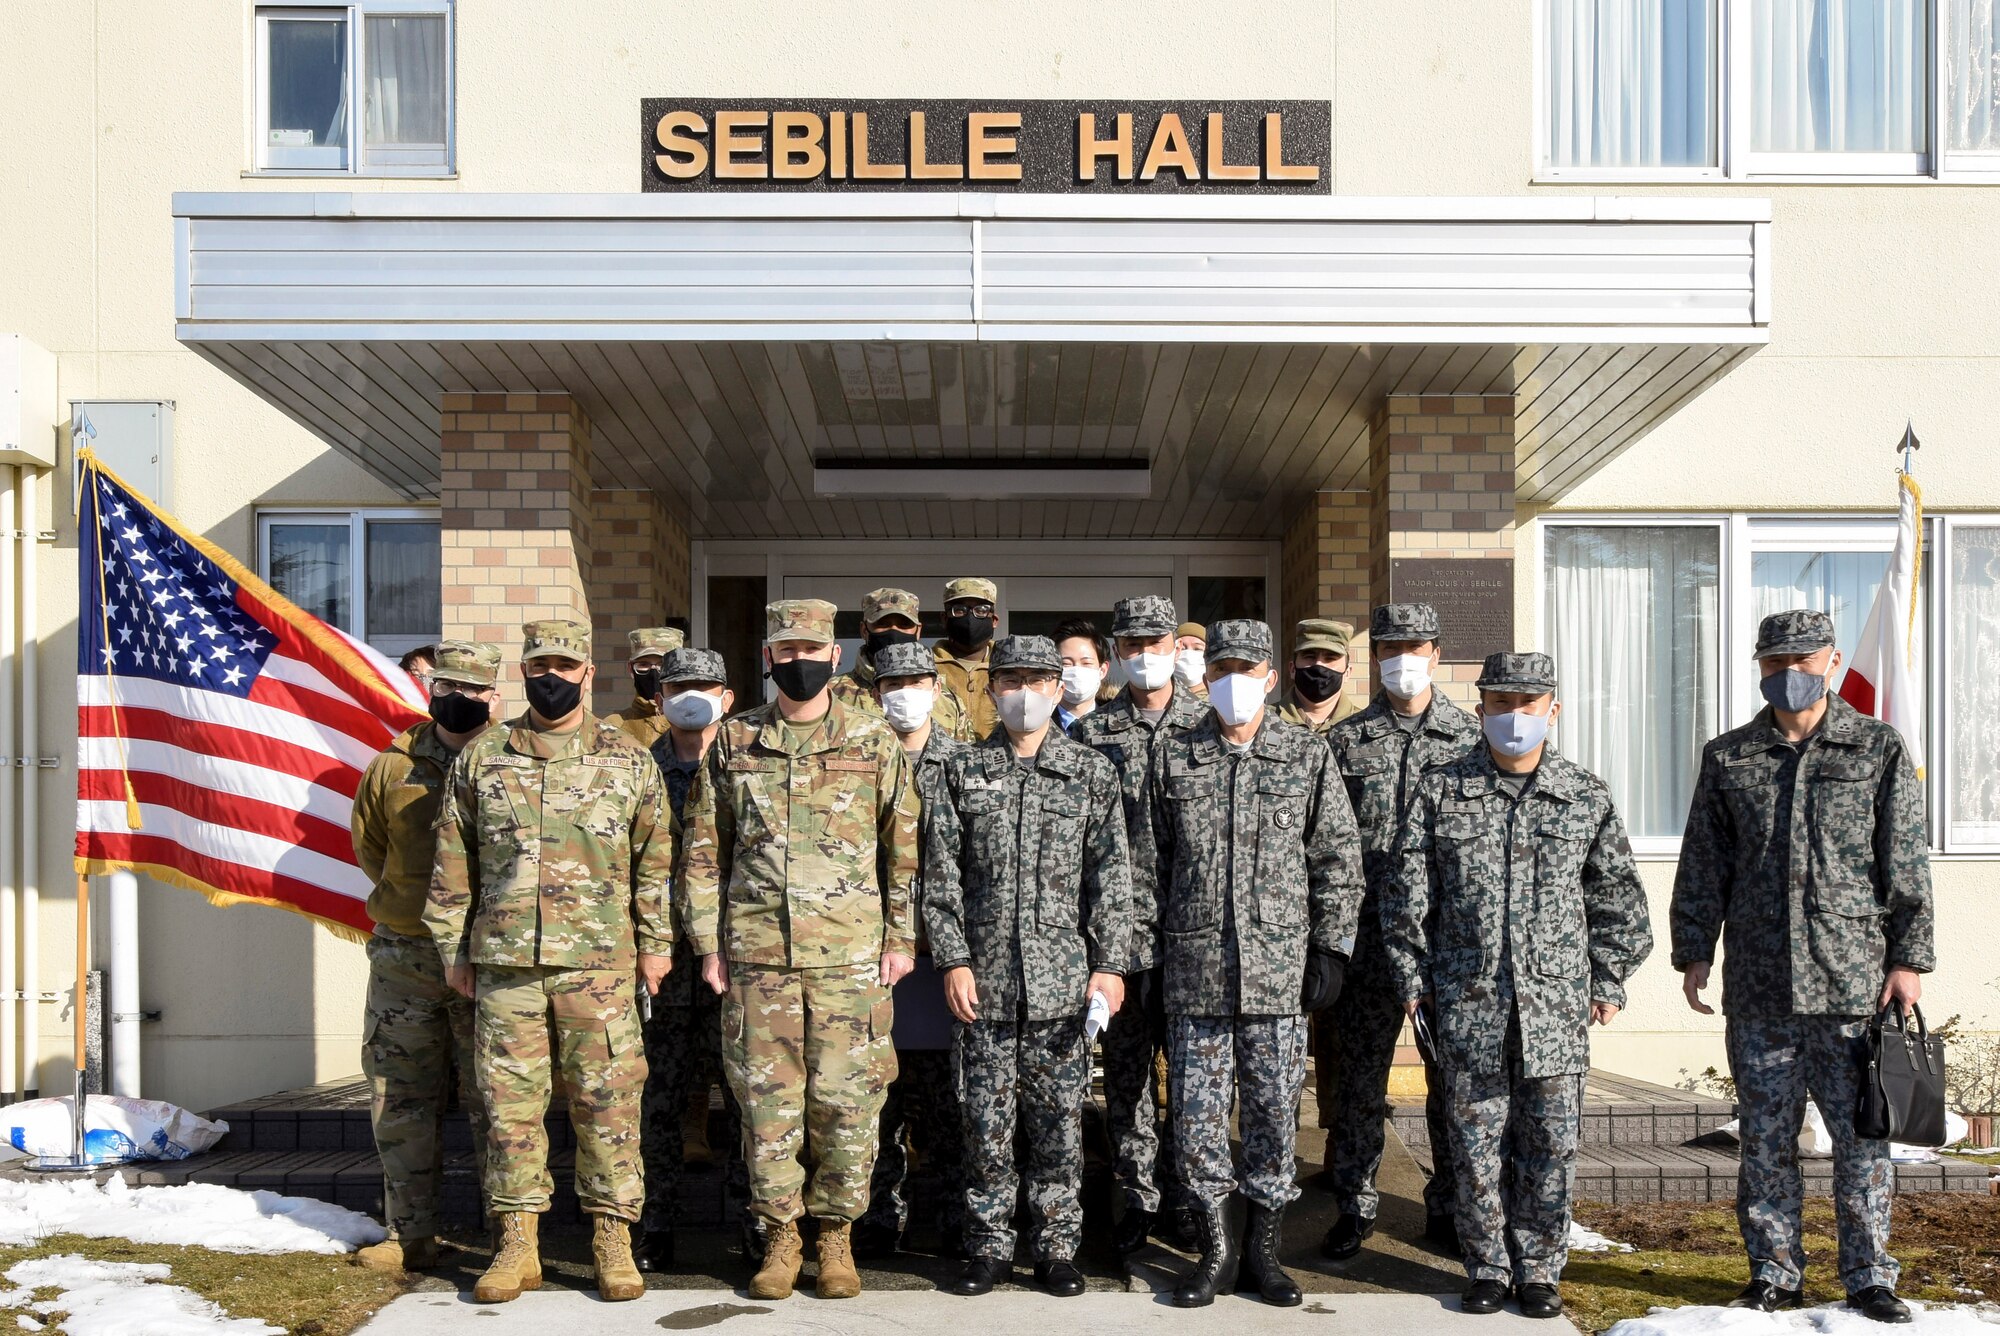 U.S. and Japanese Airmen pose for a group photo after touring the 35th Fighter Wing's unaccompanied housing campus at Misawa Air Base, Japan, Feb. 26, 2021. U.S. Air Force Col. William Bernhard, 35th Mission Support Group commander, hosted Japan Air Self-Defense Force Col. Kato Fumihiko, 3rd Air Wing vice commander, and other JASDF leaders on the tour as they learned about the 35th FW's quality of life standards, room layouts, and other management techniques used to provide a quality living standard for unaccompanied Airmen. (U.S. Air Force photo by Tech. Sgt. Timothy Moore)